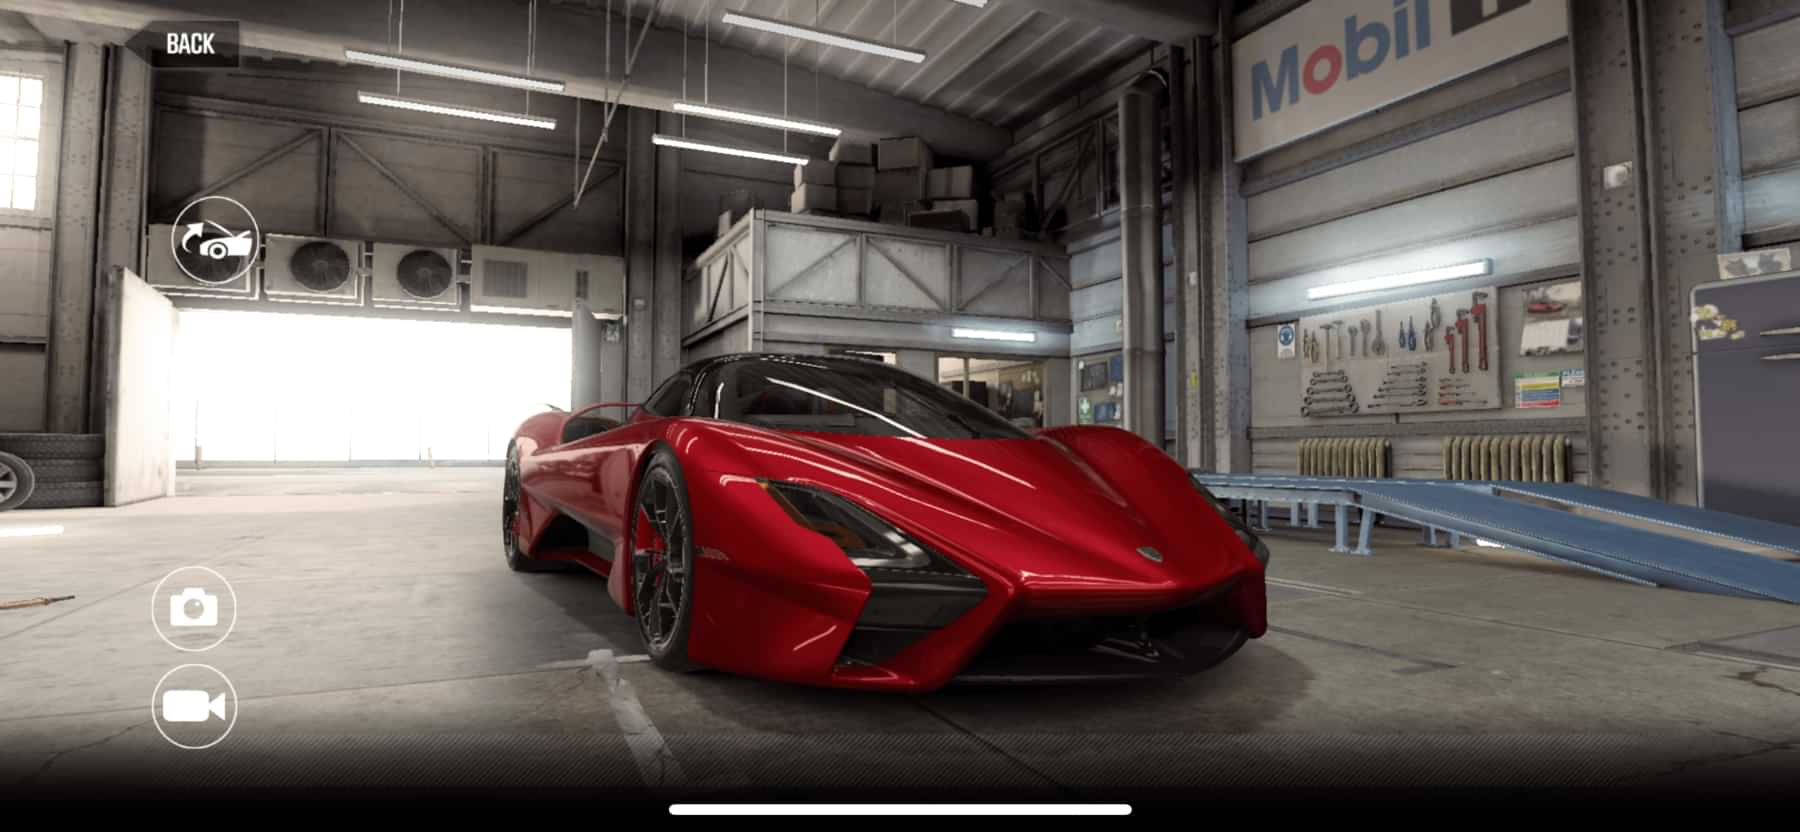 csr2 can't watch ads – Connectivity Issues